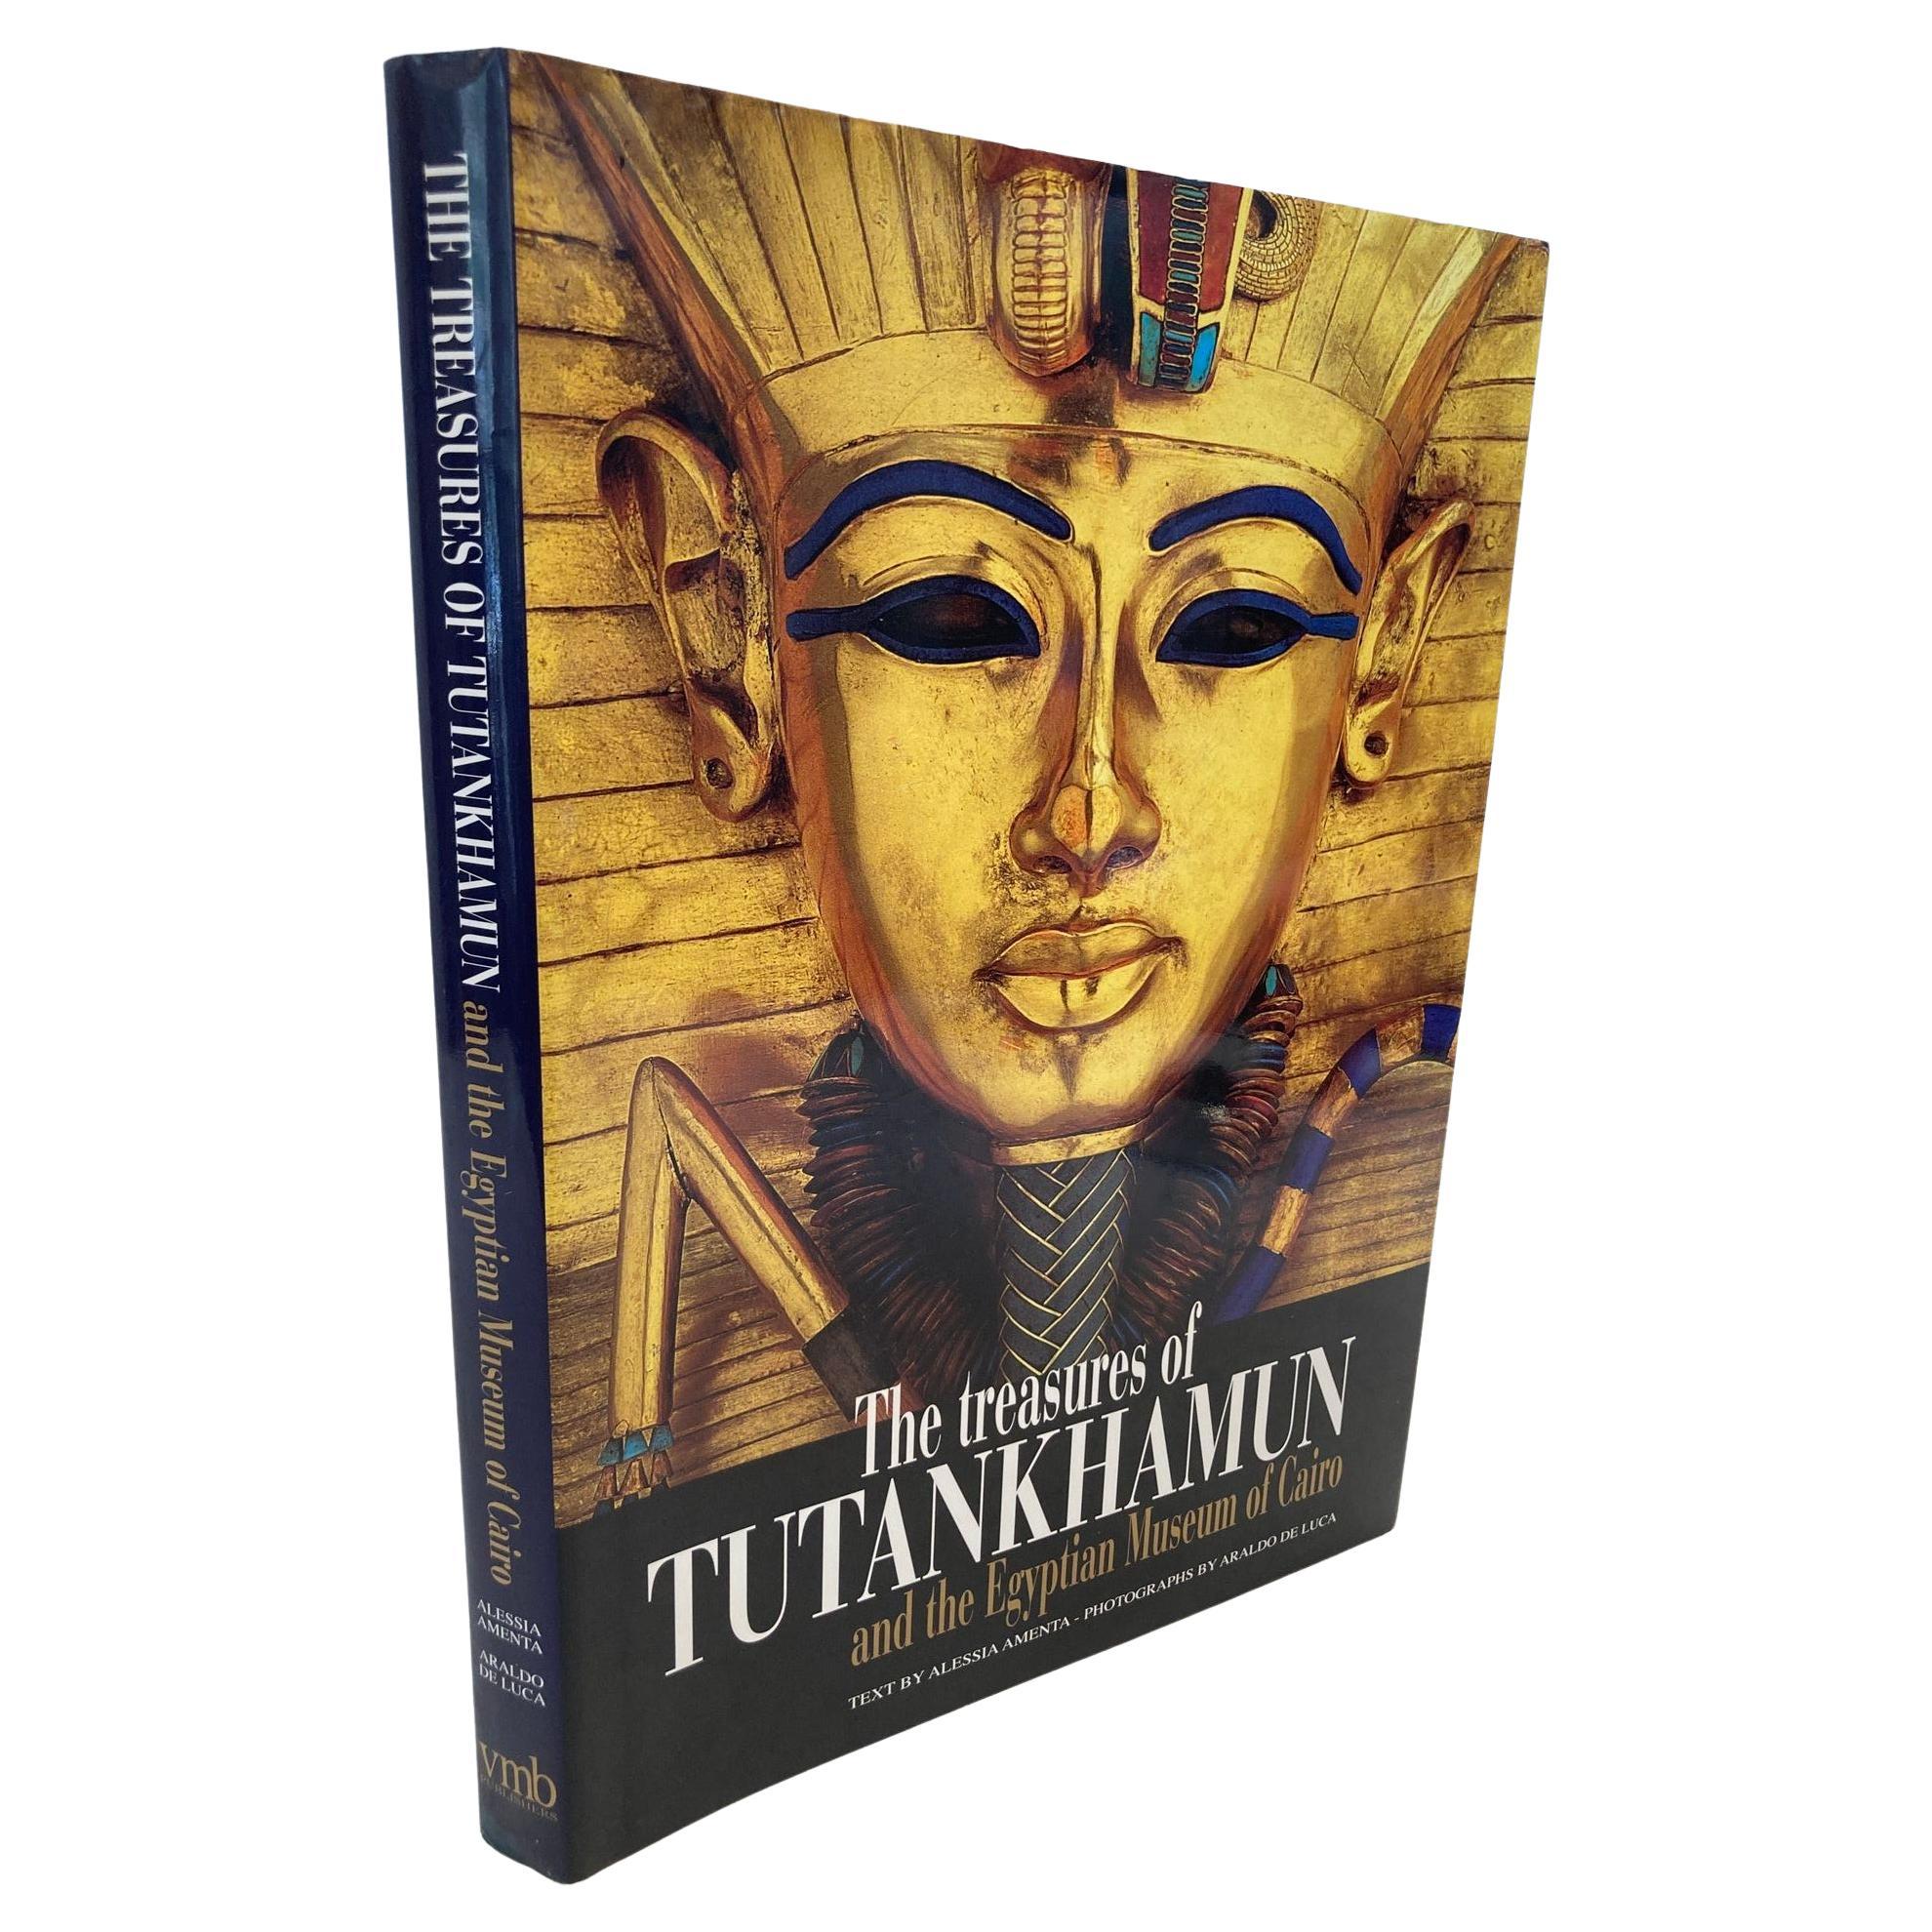 Livre à couverture rigide « Treasures of Tutankhamun and the Egyptian Museum in Cairo